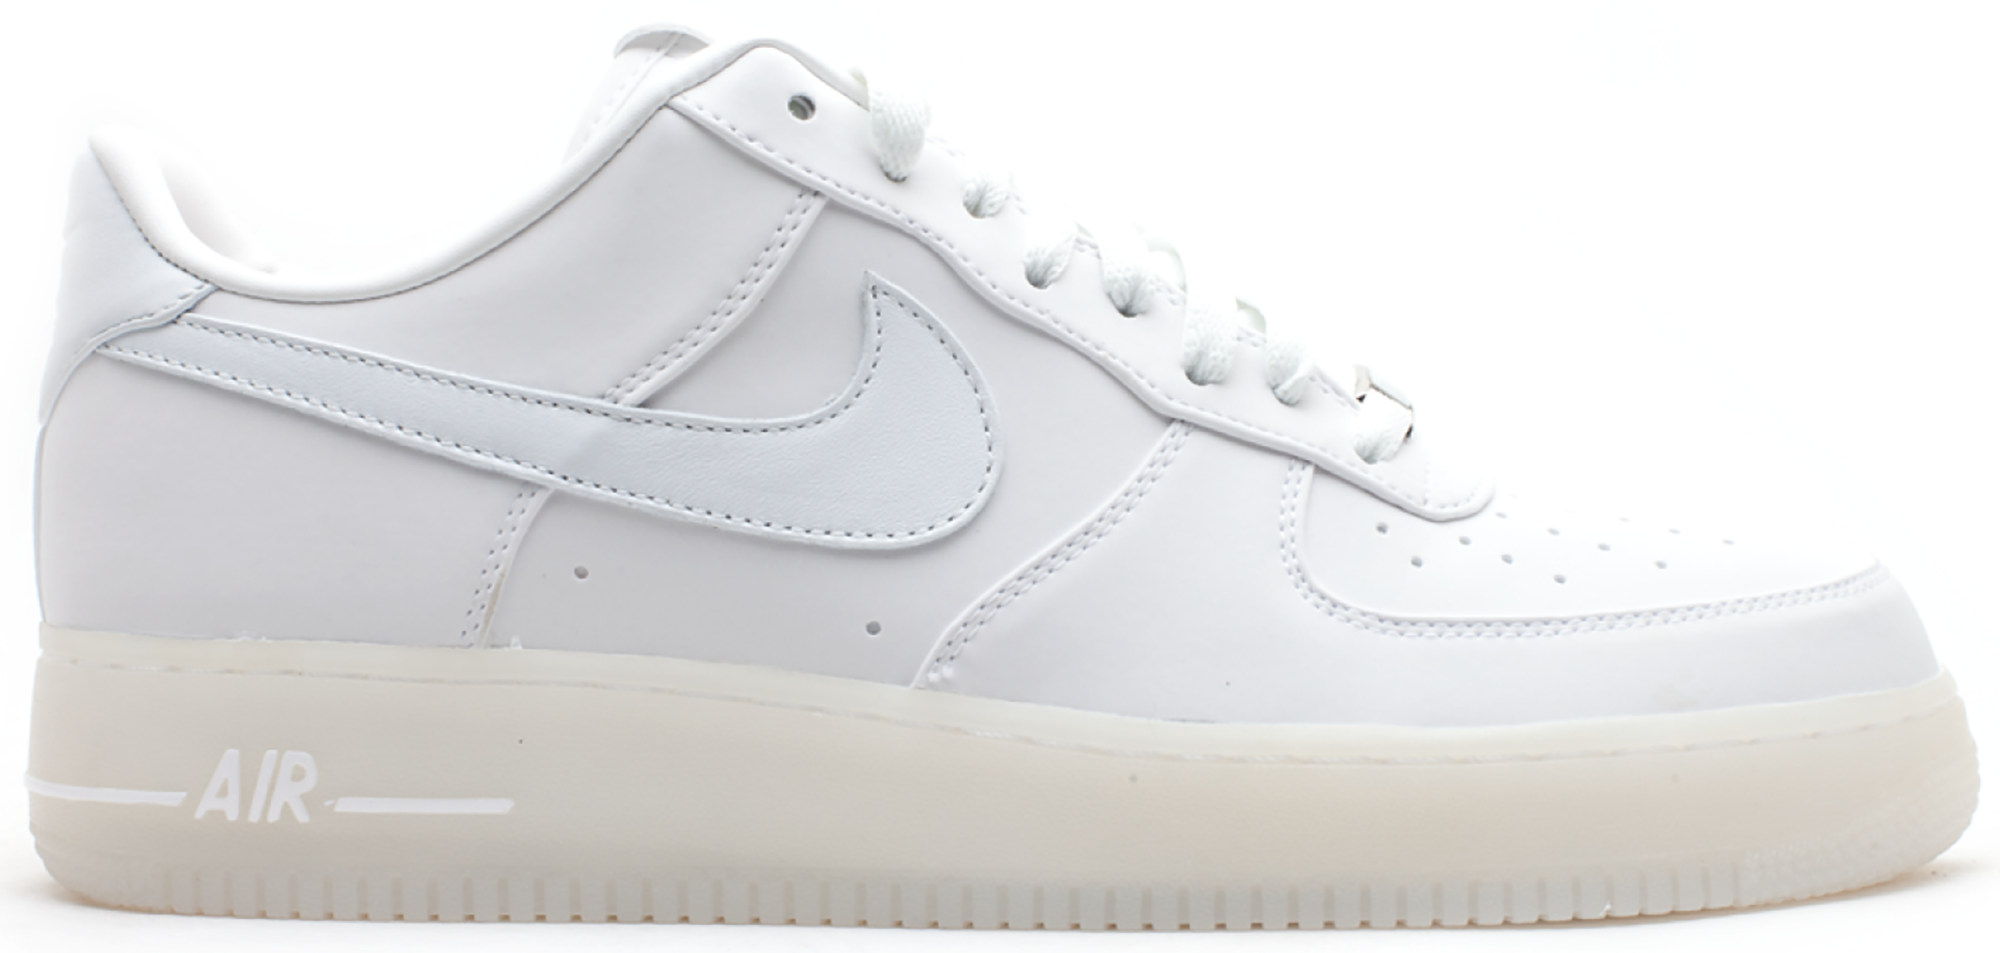 nike air force low top white